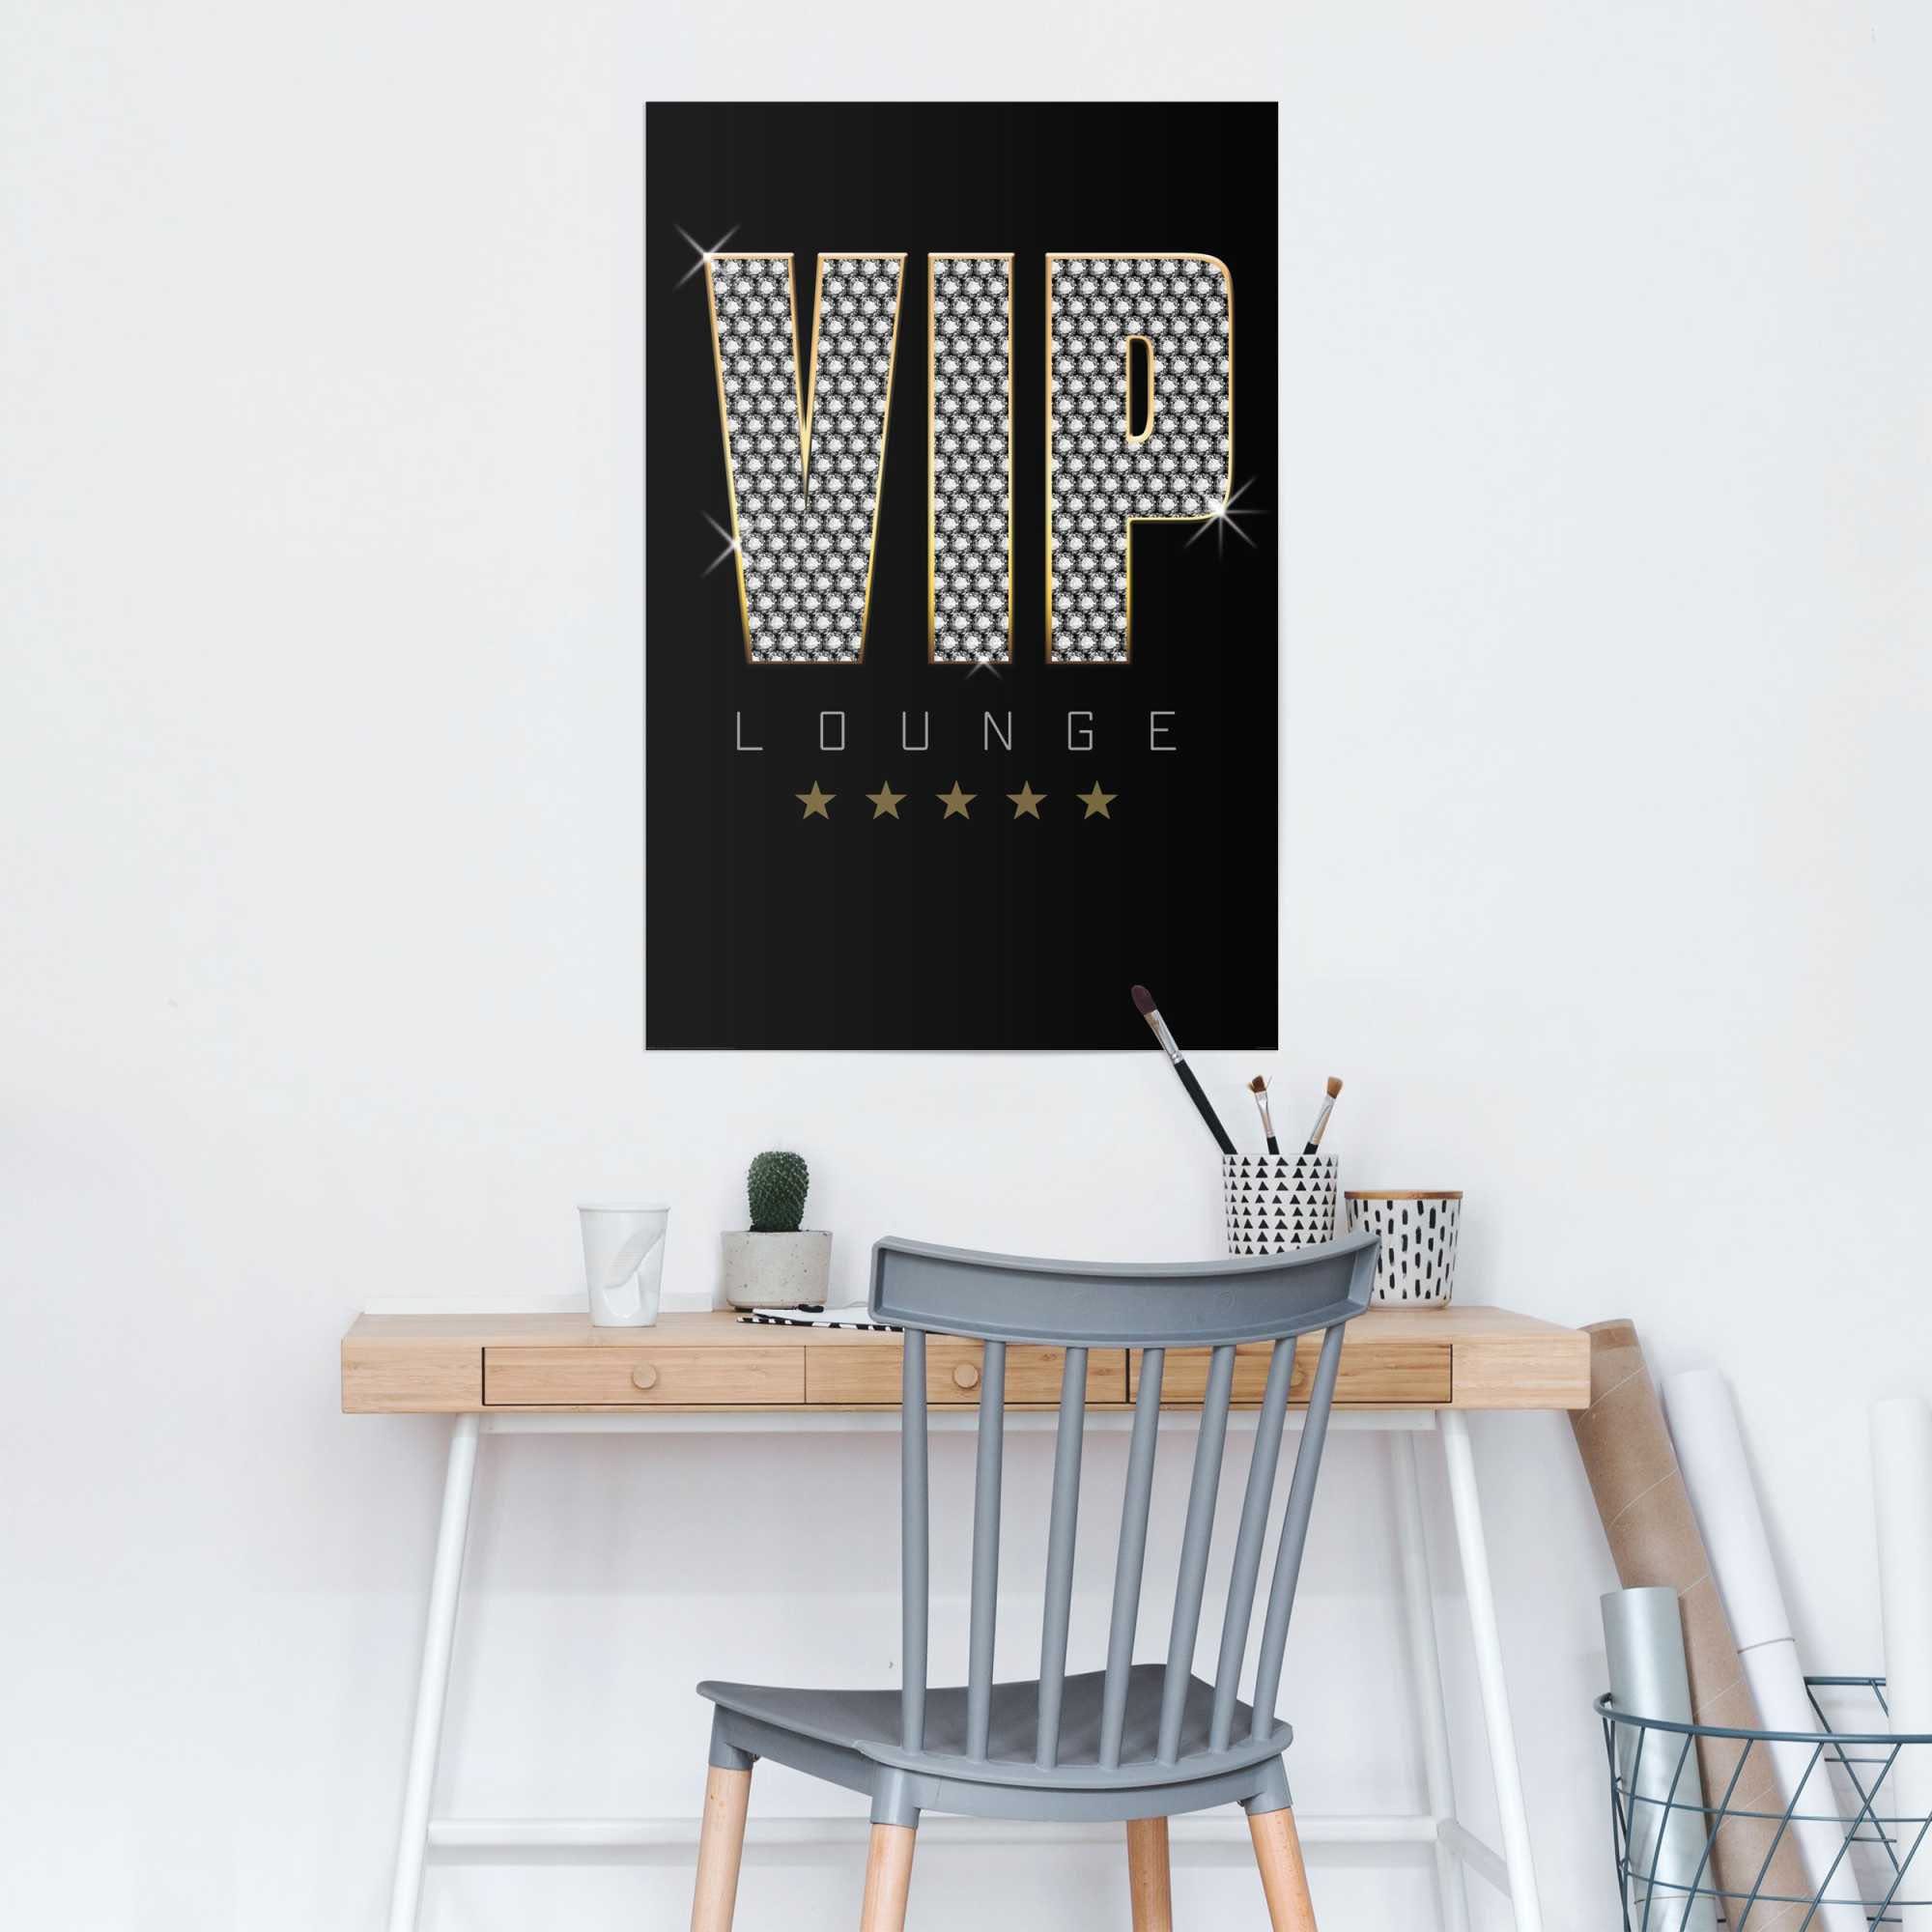 (1 Lounge, Poster St) Reinders! Vip